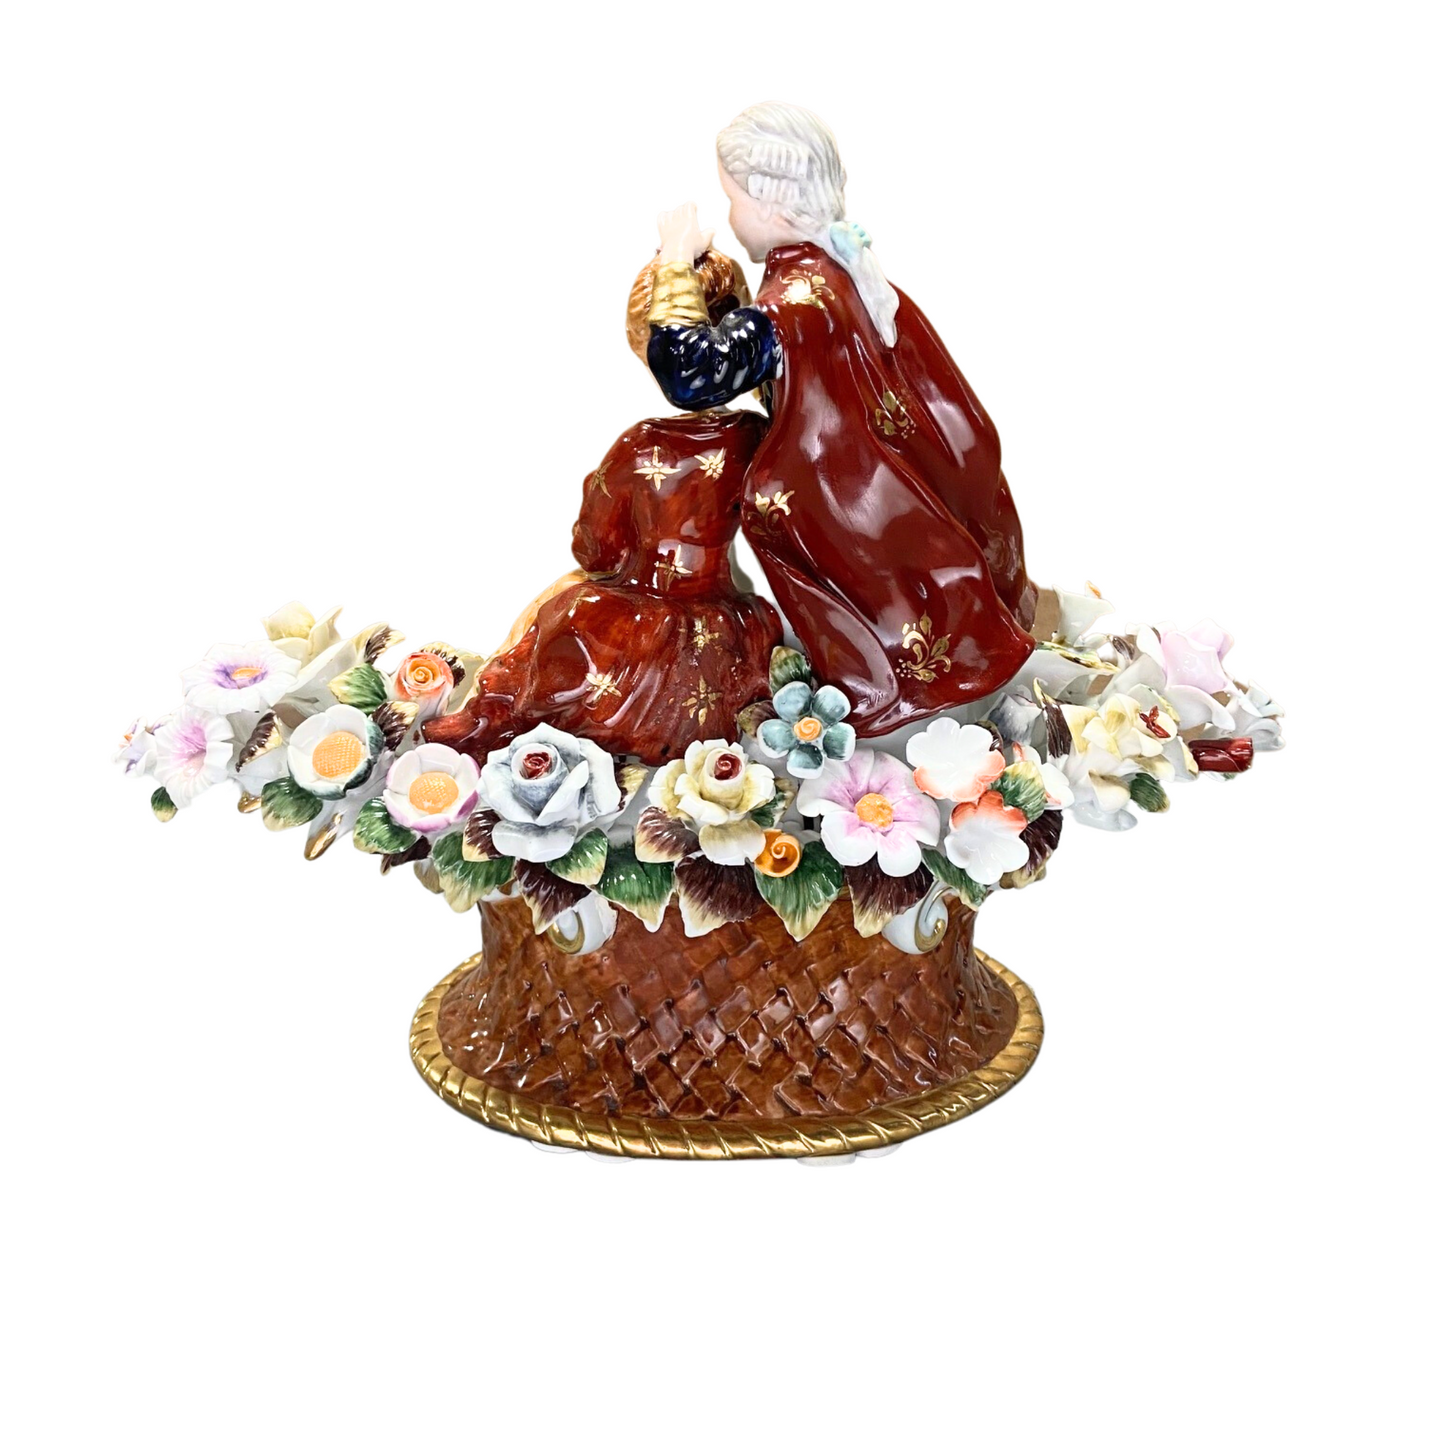 Courtship By Bed of Flowers Porcelain Figurine